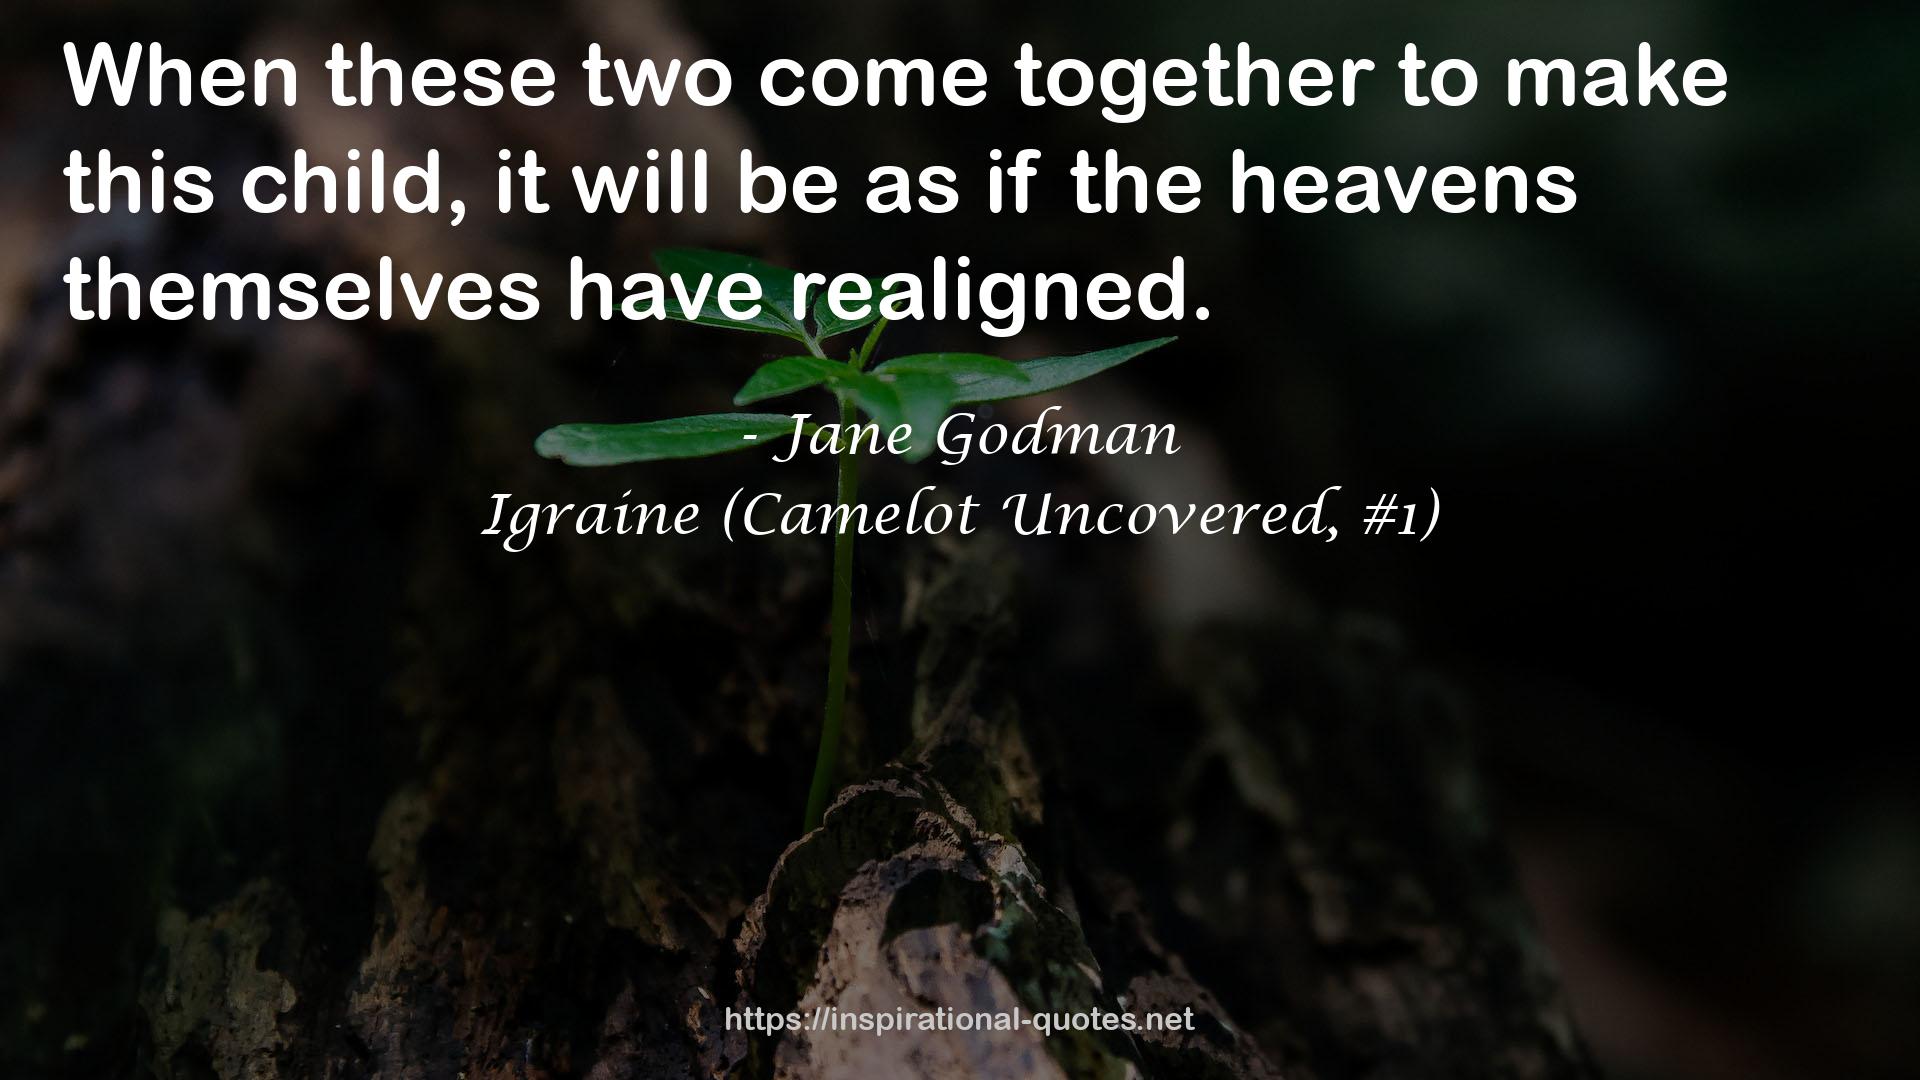 Igraine (Camelot Uncovered, #1) QUOTES